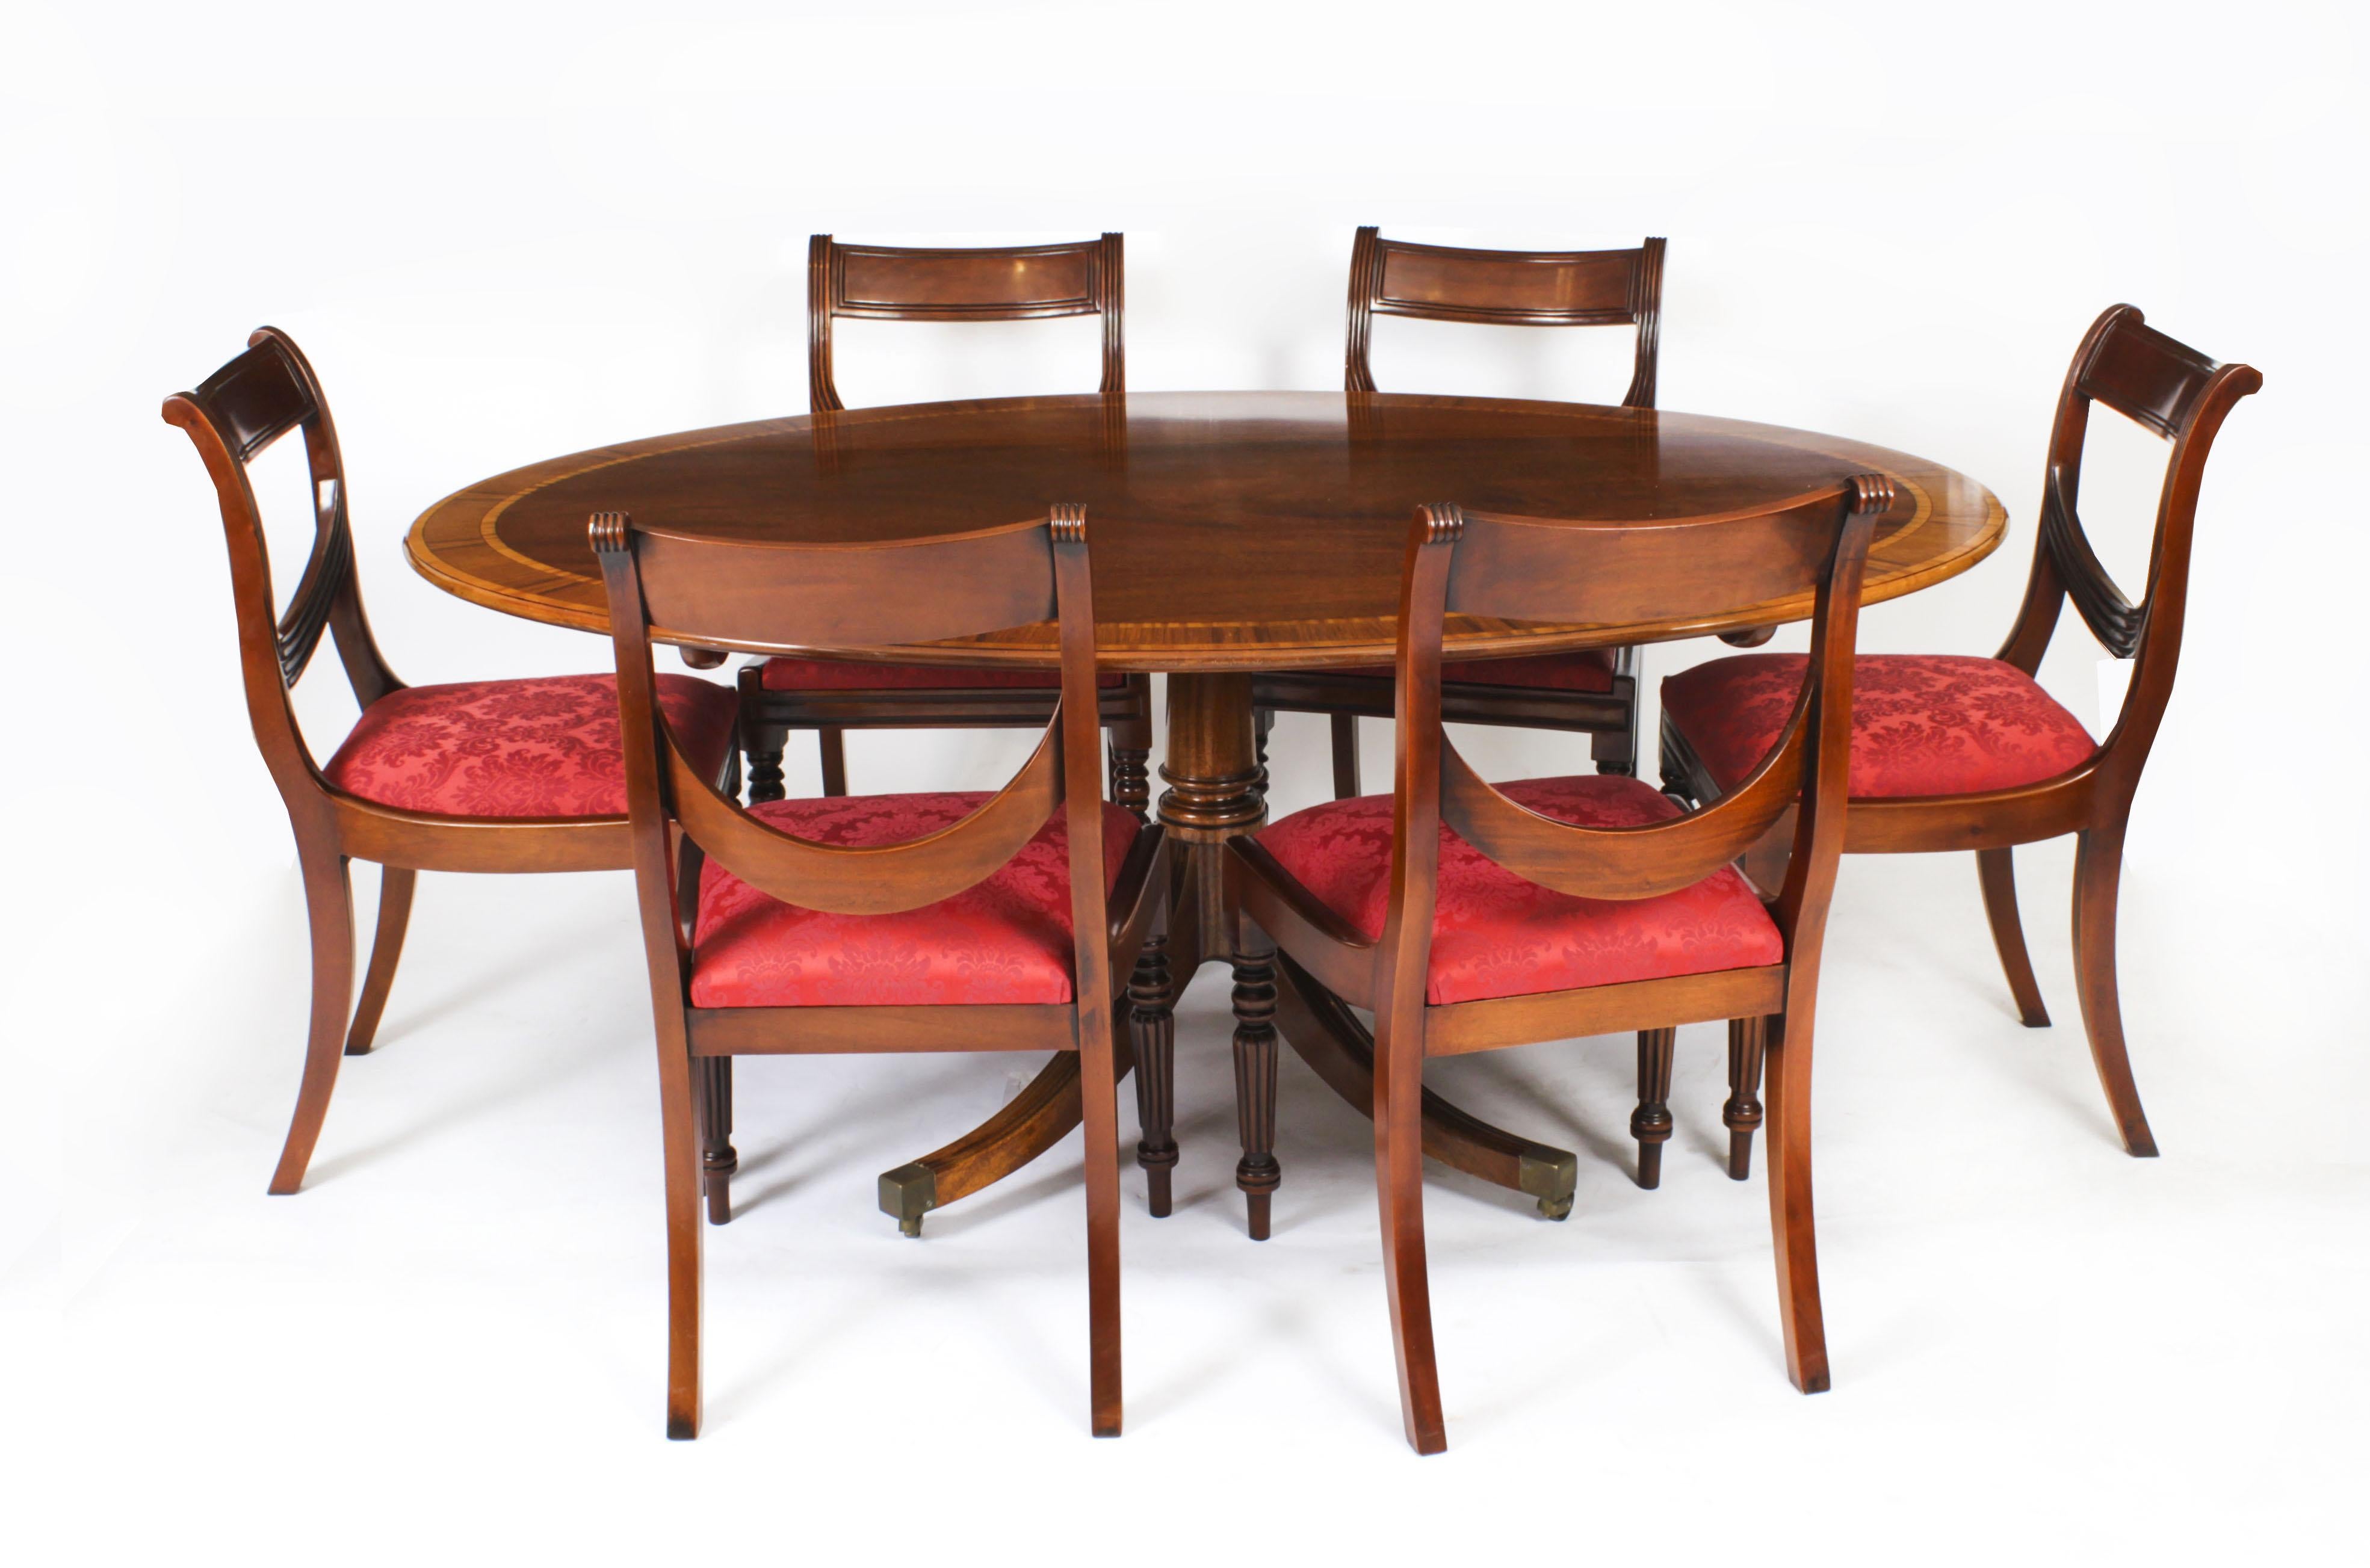 This is a beautiful Regency Revival flame mahogany and Satinwood banded oval dining table dating from Circa 1980 that was made by the Master Cabinet maker William Tillman and bears his label on the underside. 

The fabulous 5ft 6inch flame